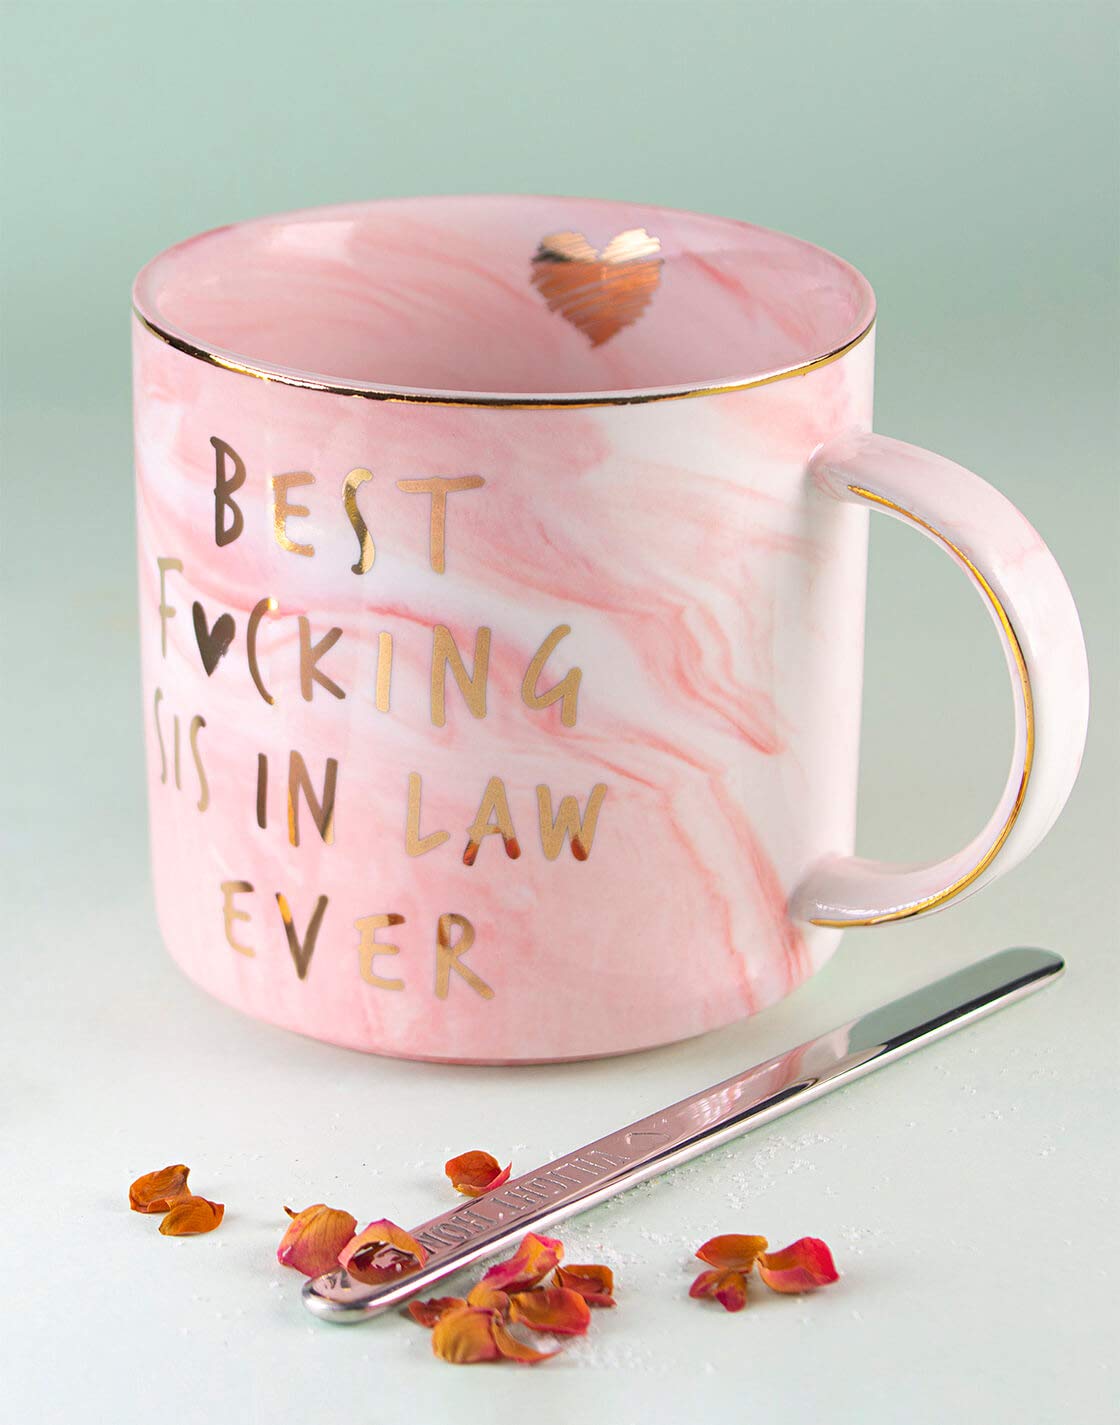 VILIGHT Best Sister in Law Ever Funny Gifts Mug - Pink Marble Ceramic Coffee Cup 11.5 Oz